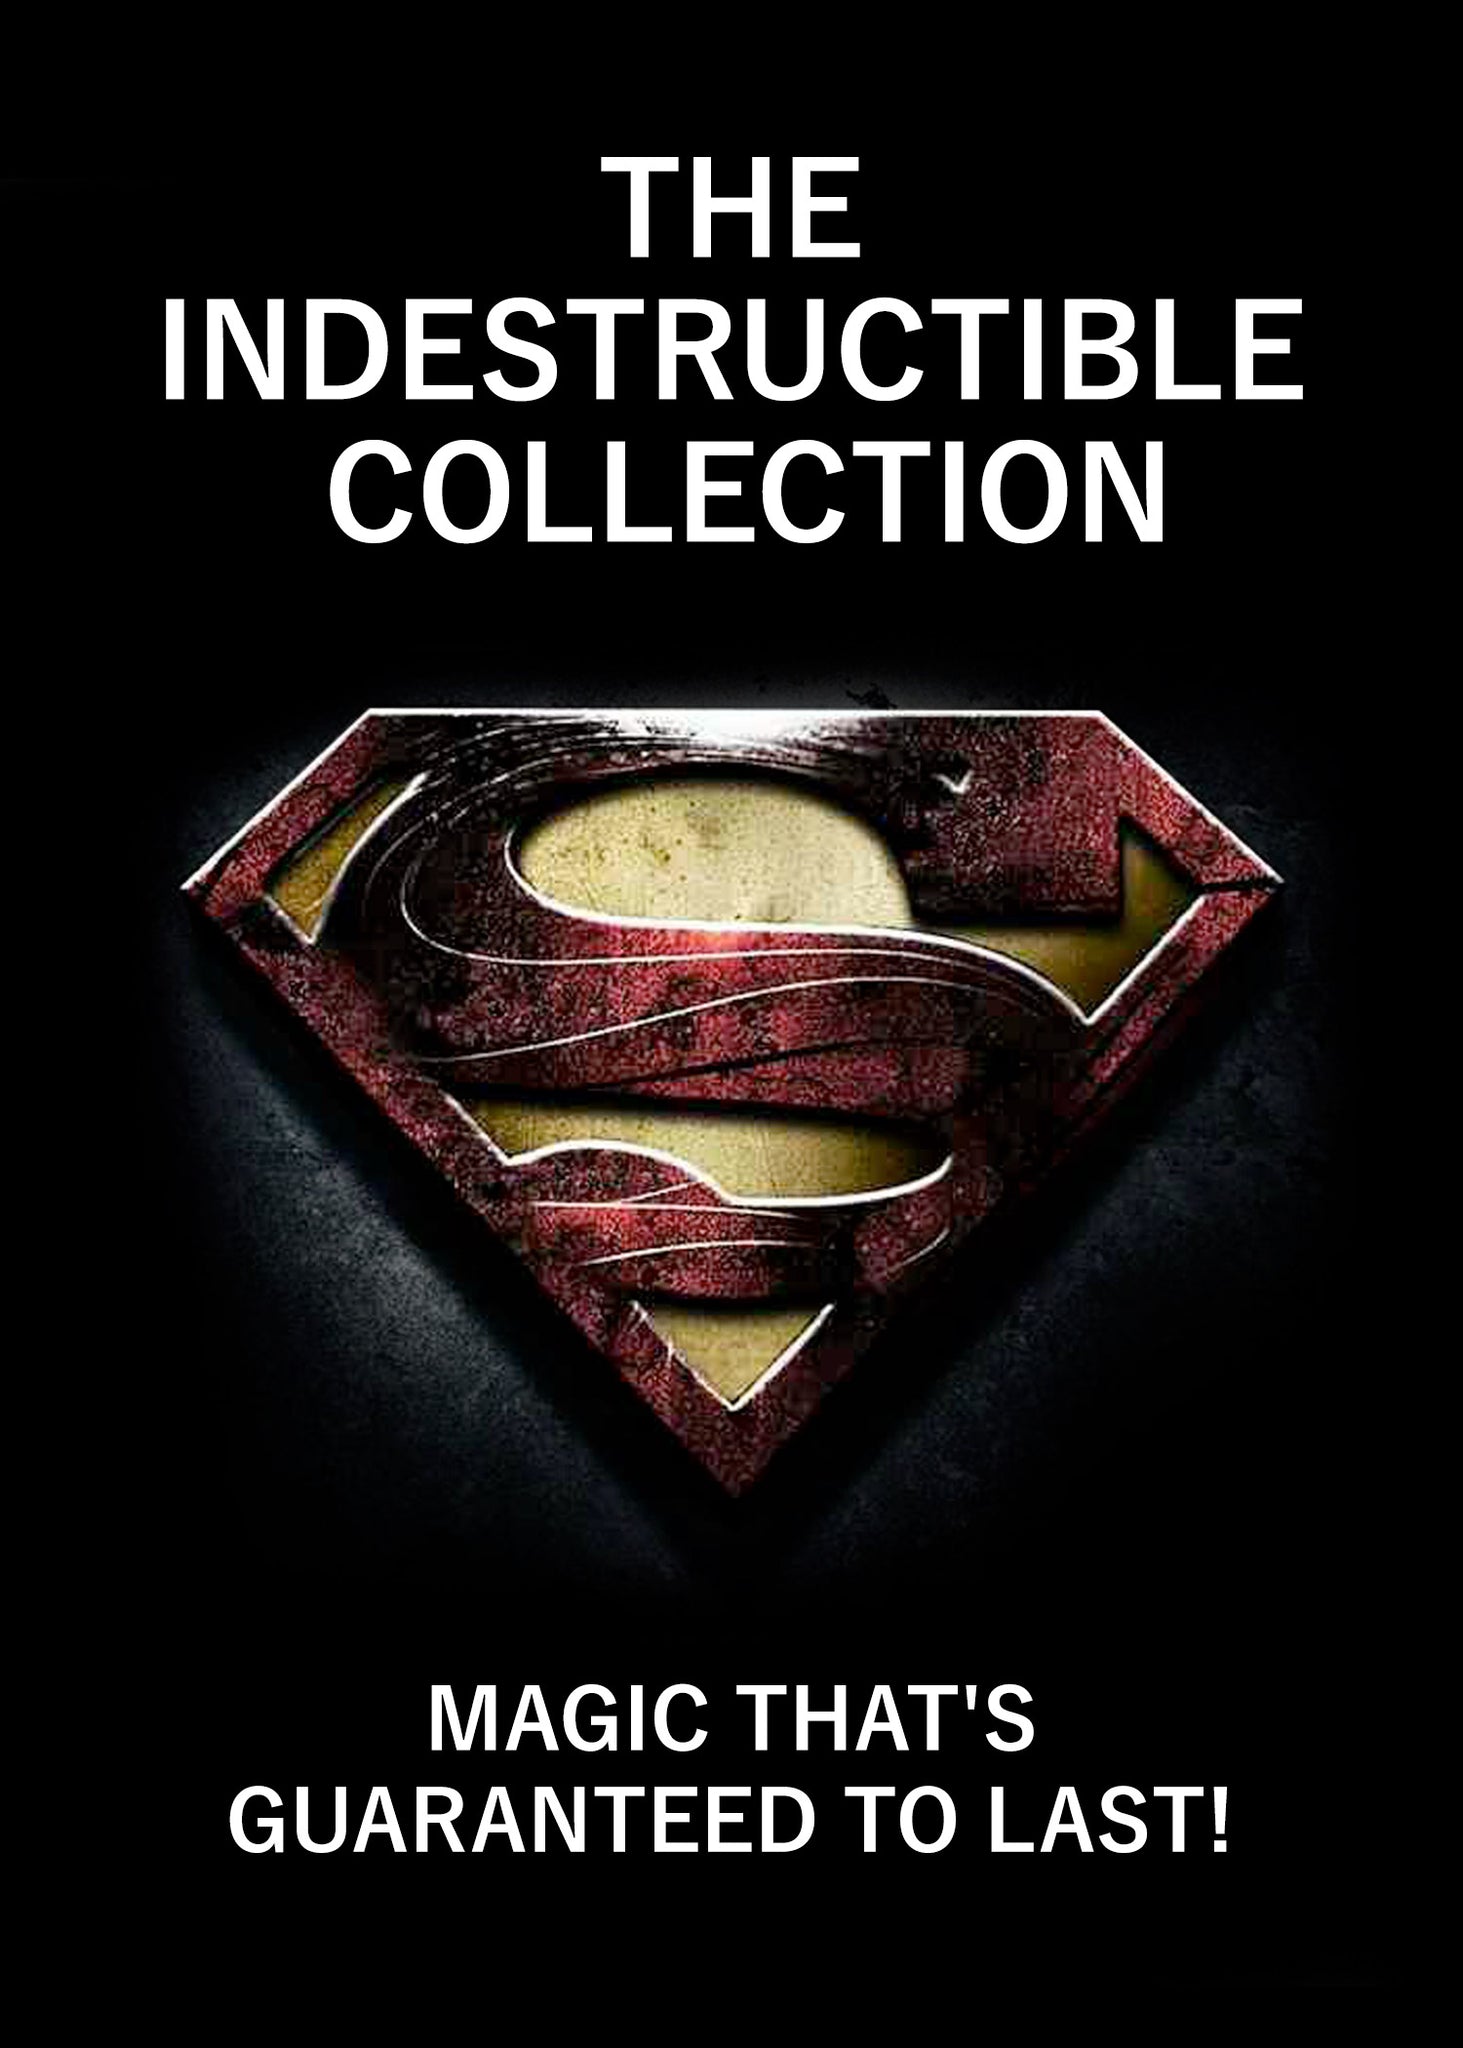 INDESTRUCTIBLE COLLECTION